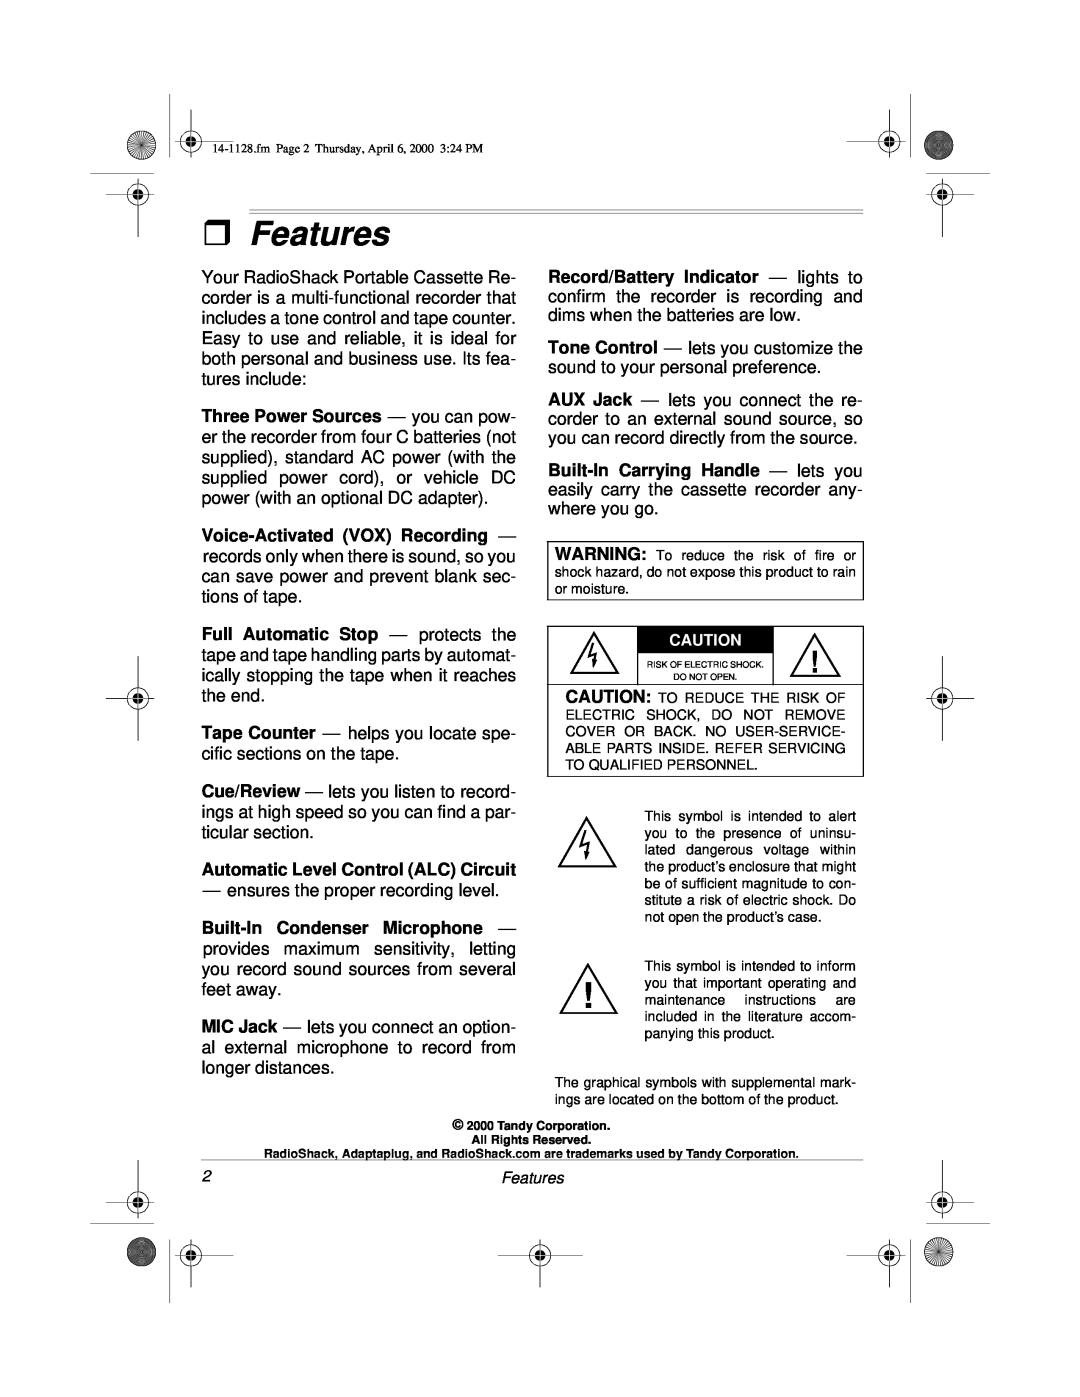 Radio Shack Portable Cassette Recorder owner manual ˆFeatures 